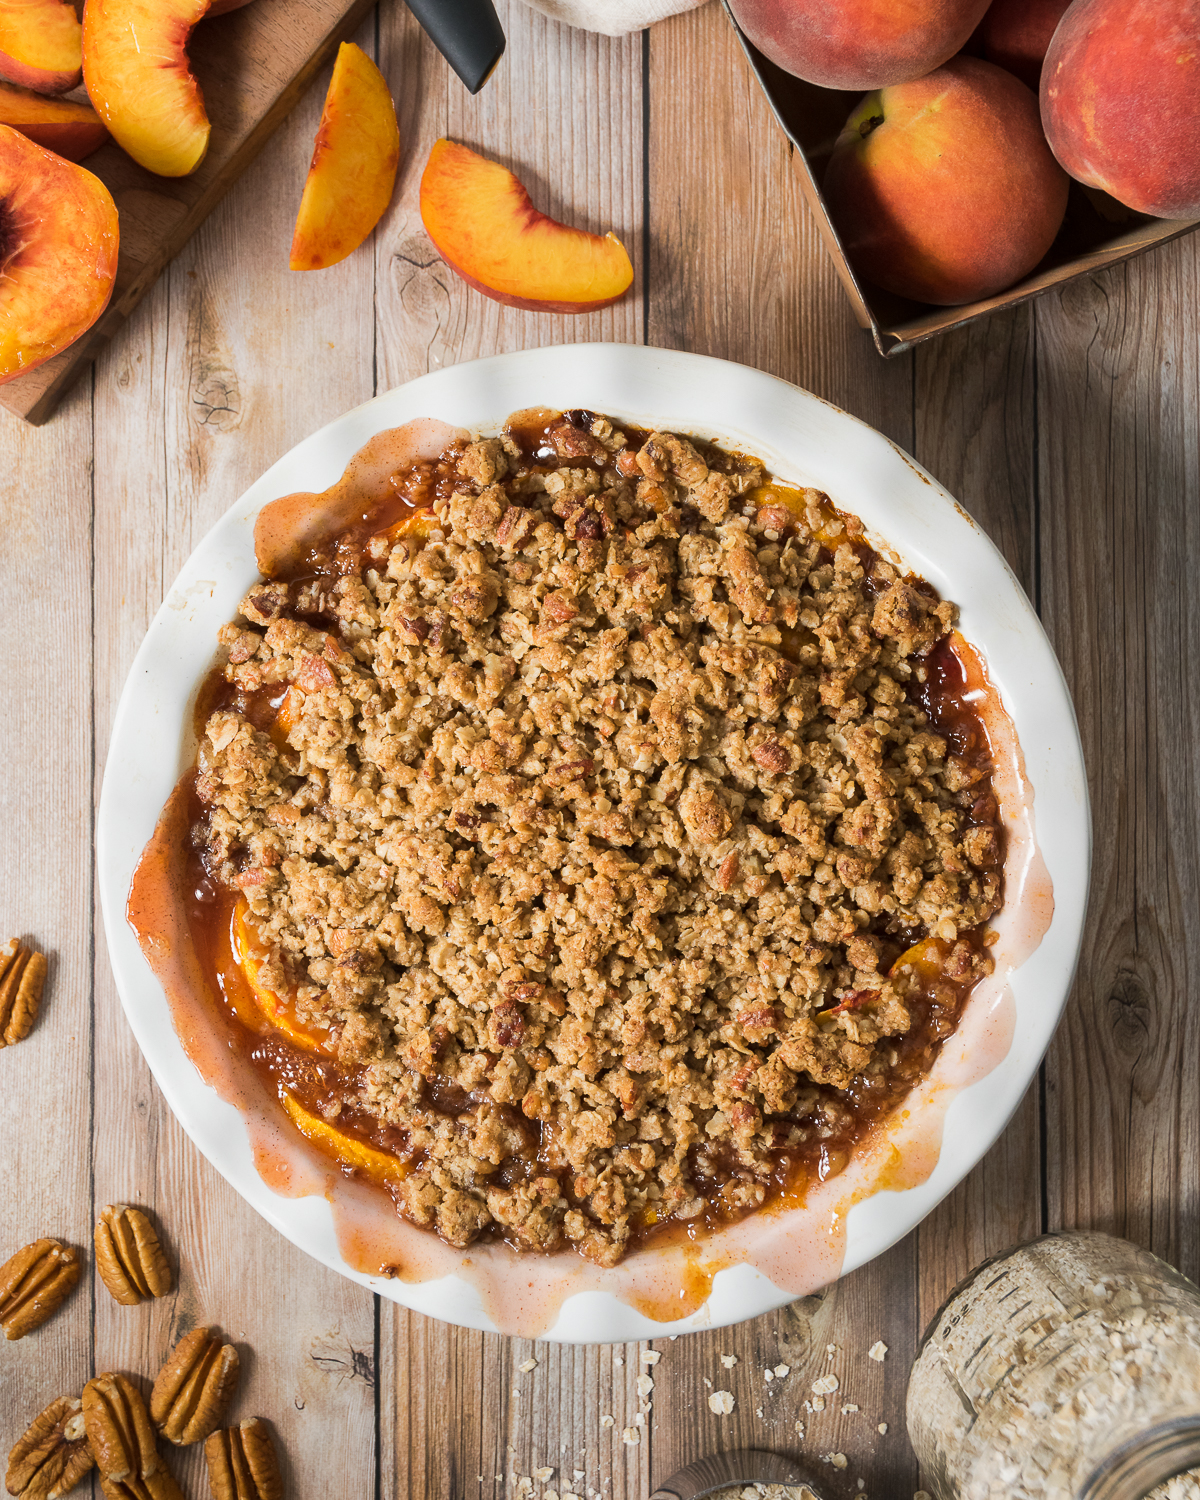 Cooked peach crisp on a wood table.